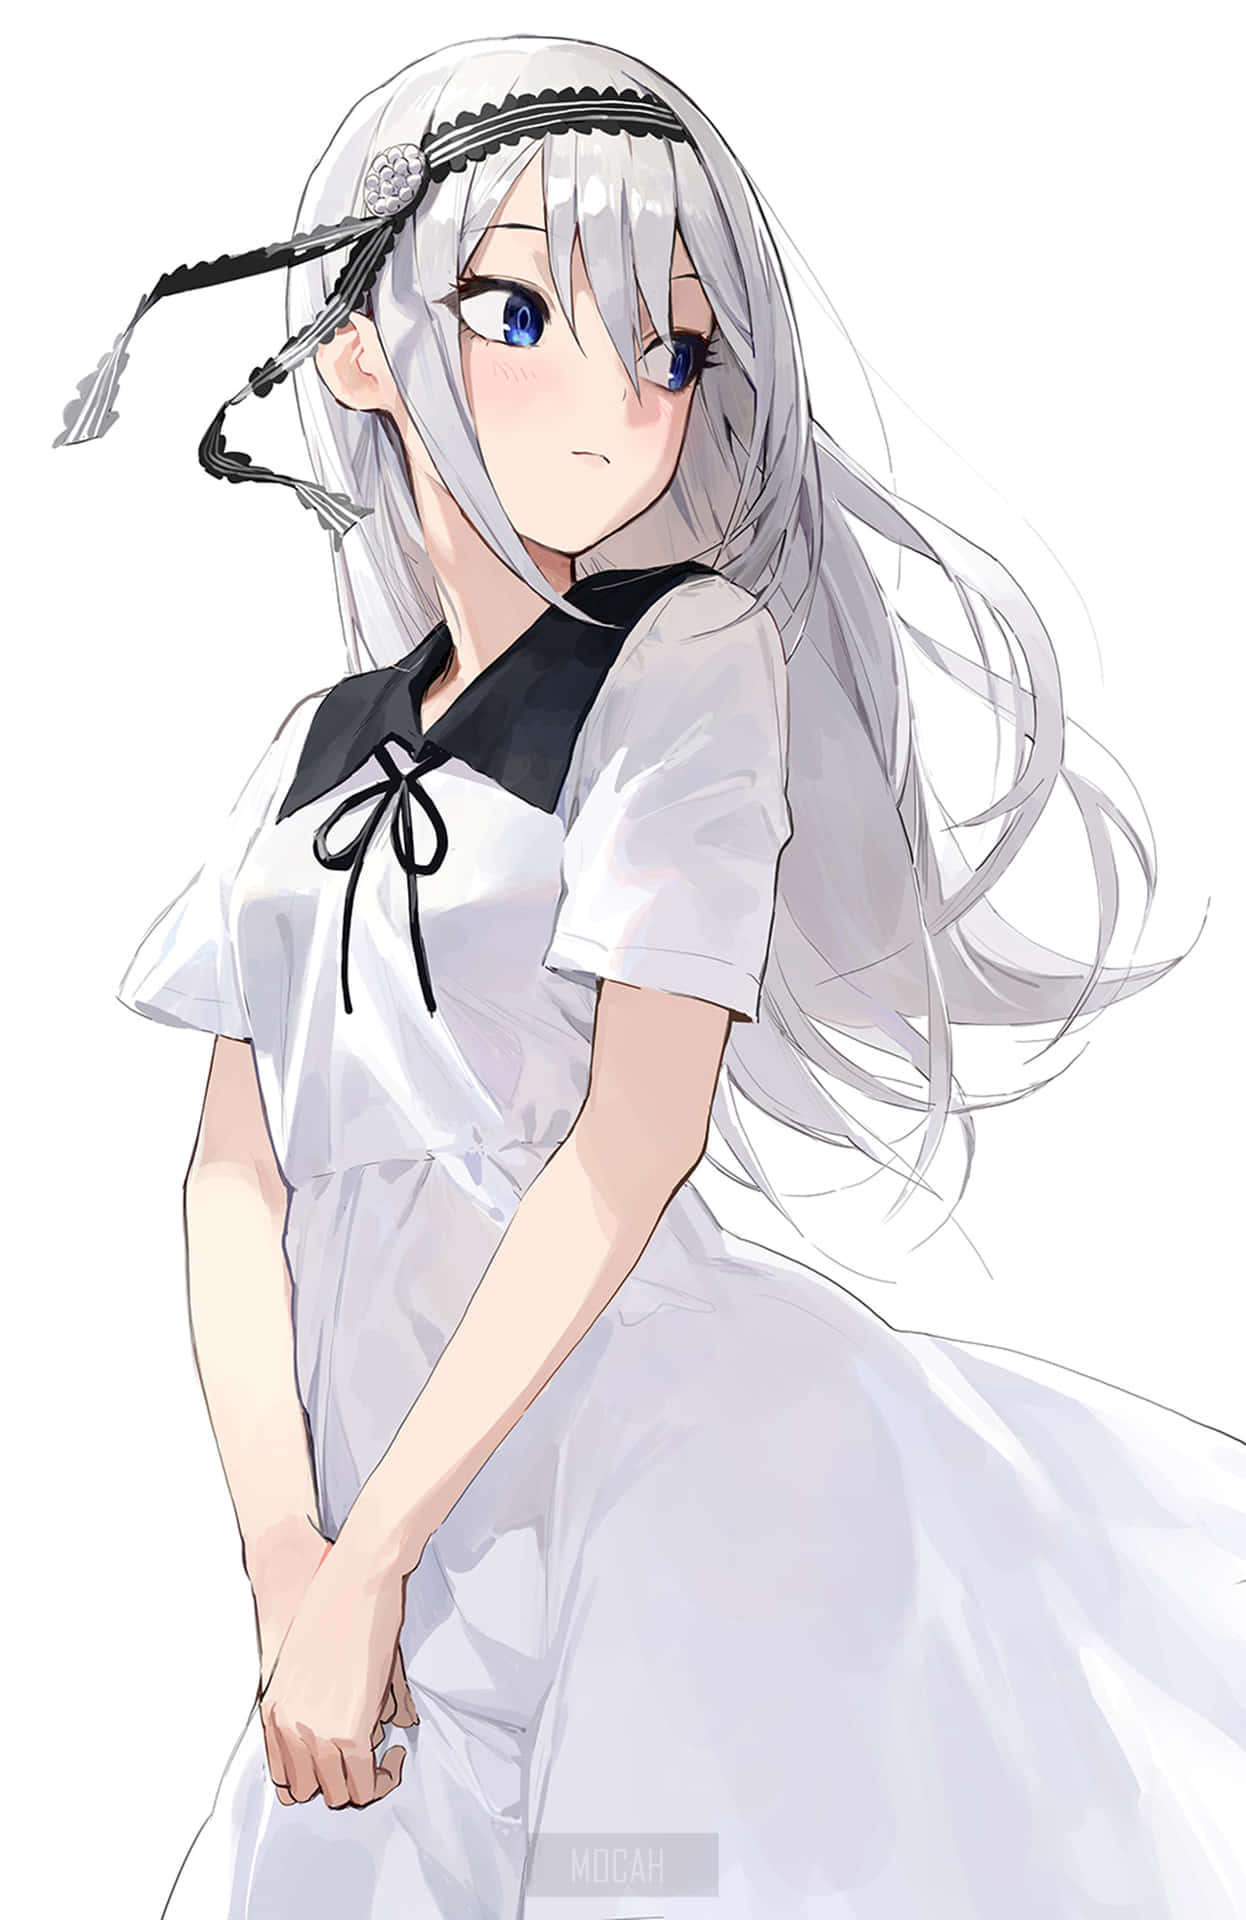 Beautiful anime girl with long white hair by zkreations on DeviantArt